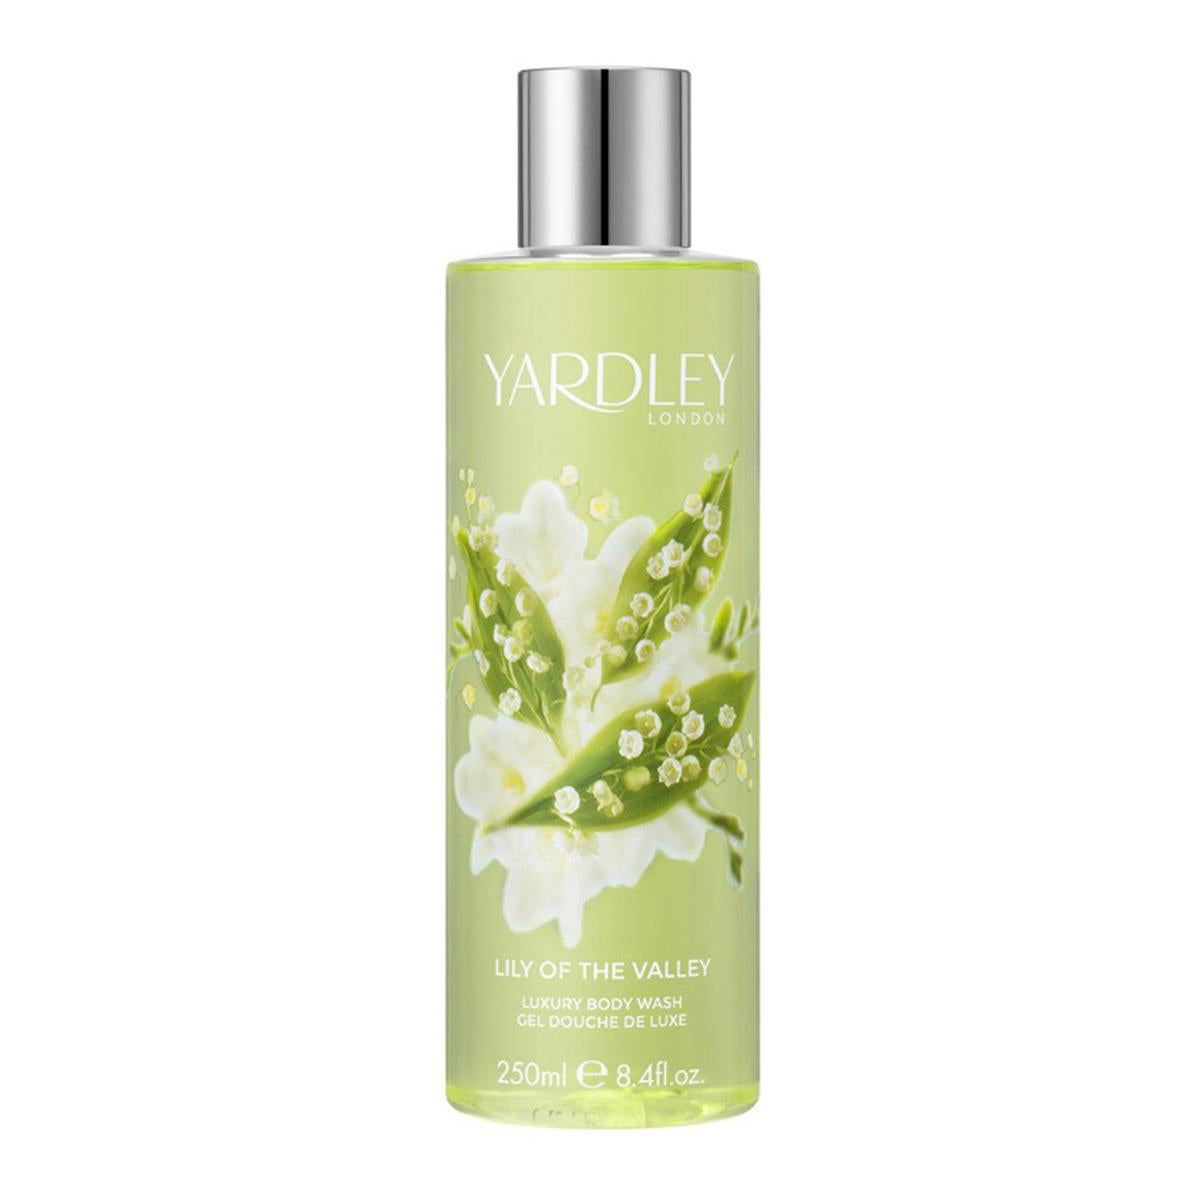 Primary image of Lily of the Valley Luxury Body Wash